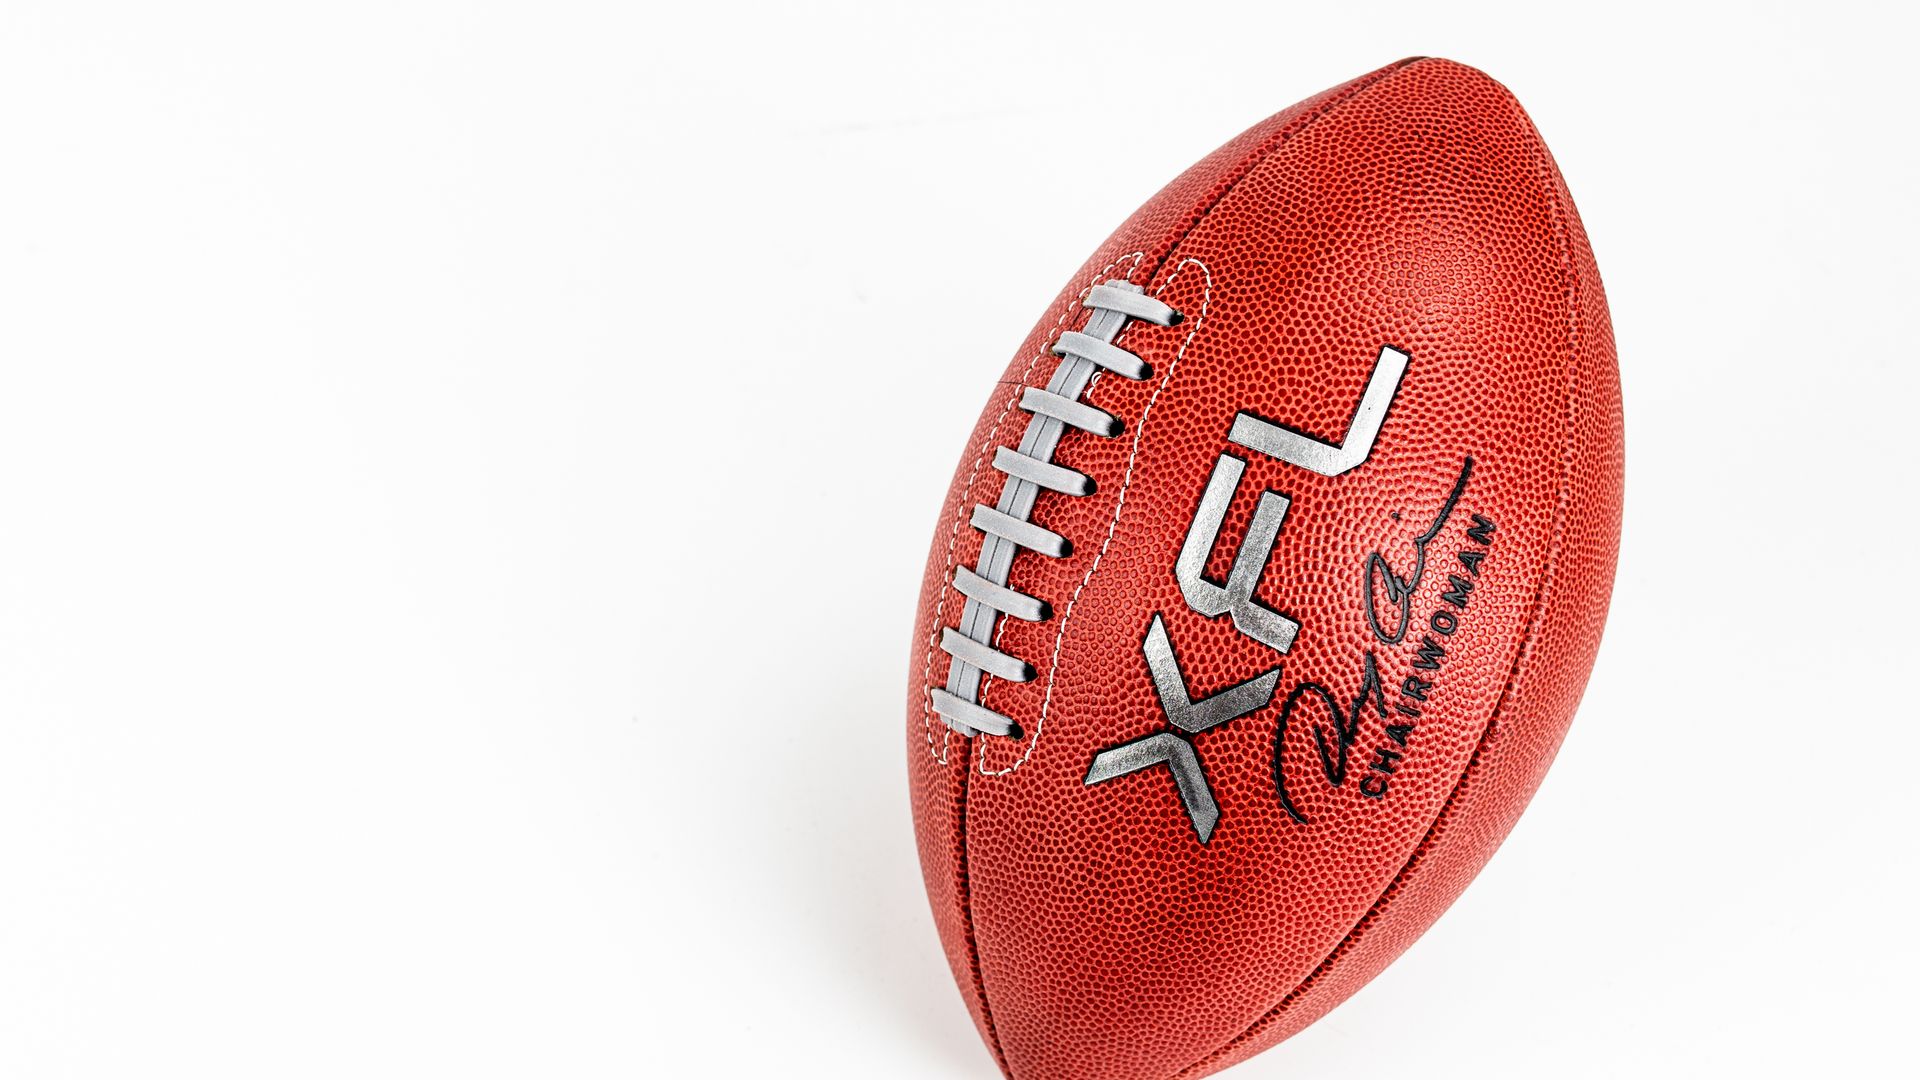 Football with the XFL logo. 